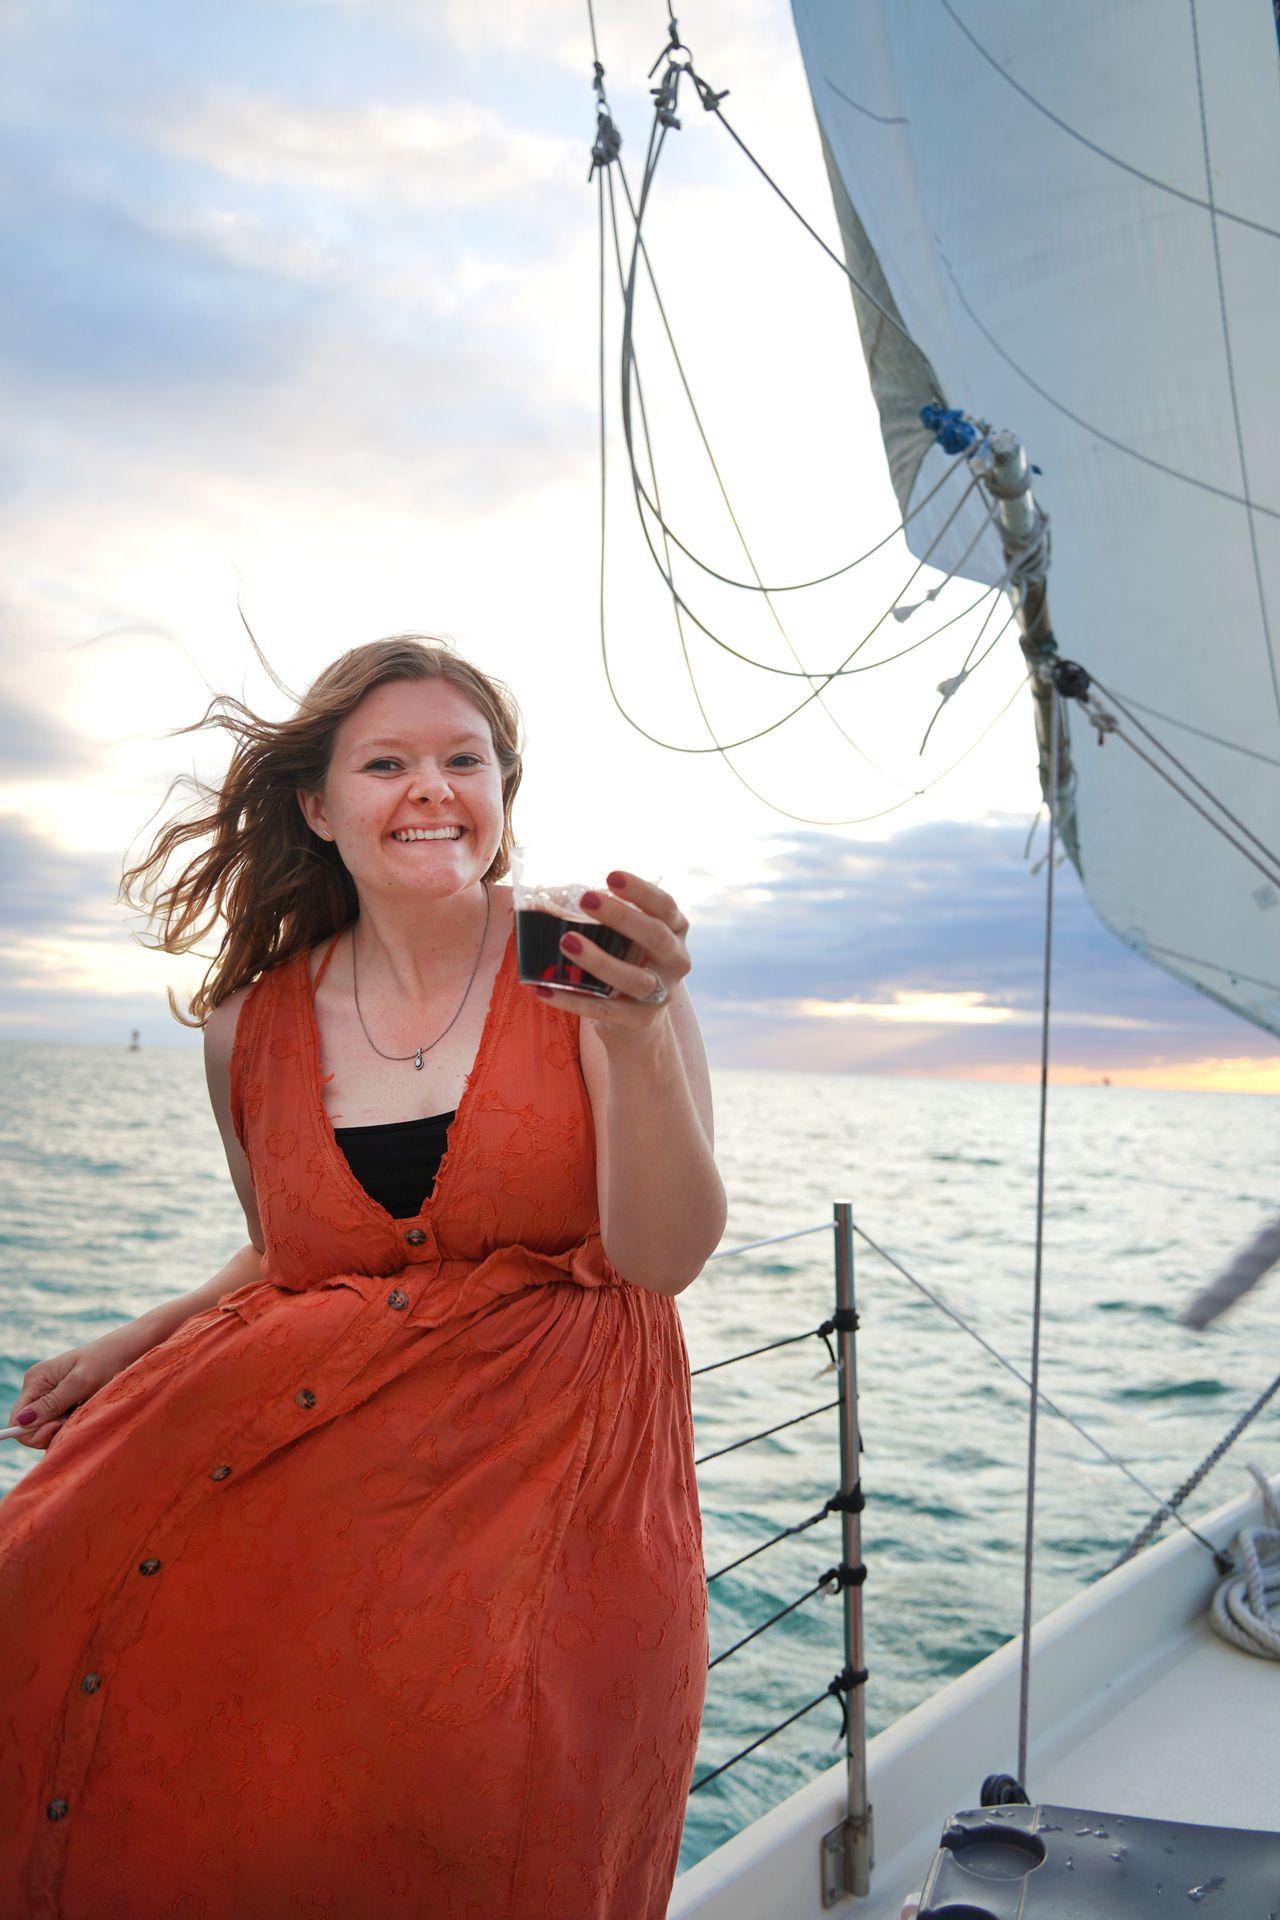 Lydia on a sailboat holding a cup of red wine. Her dress and hair blows in the wind